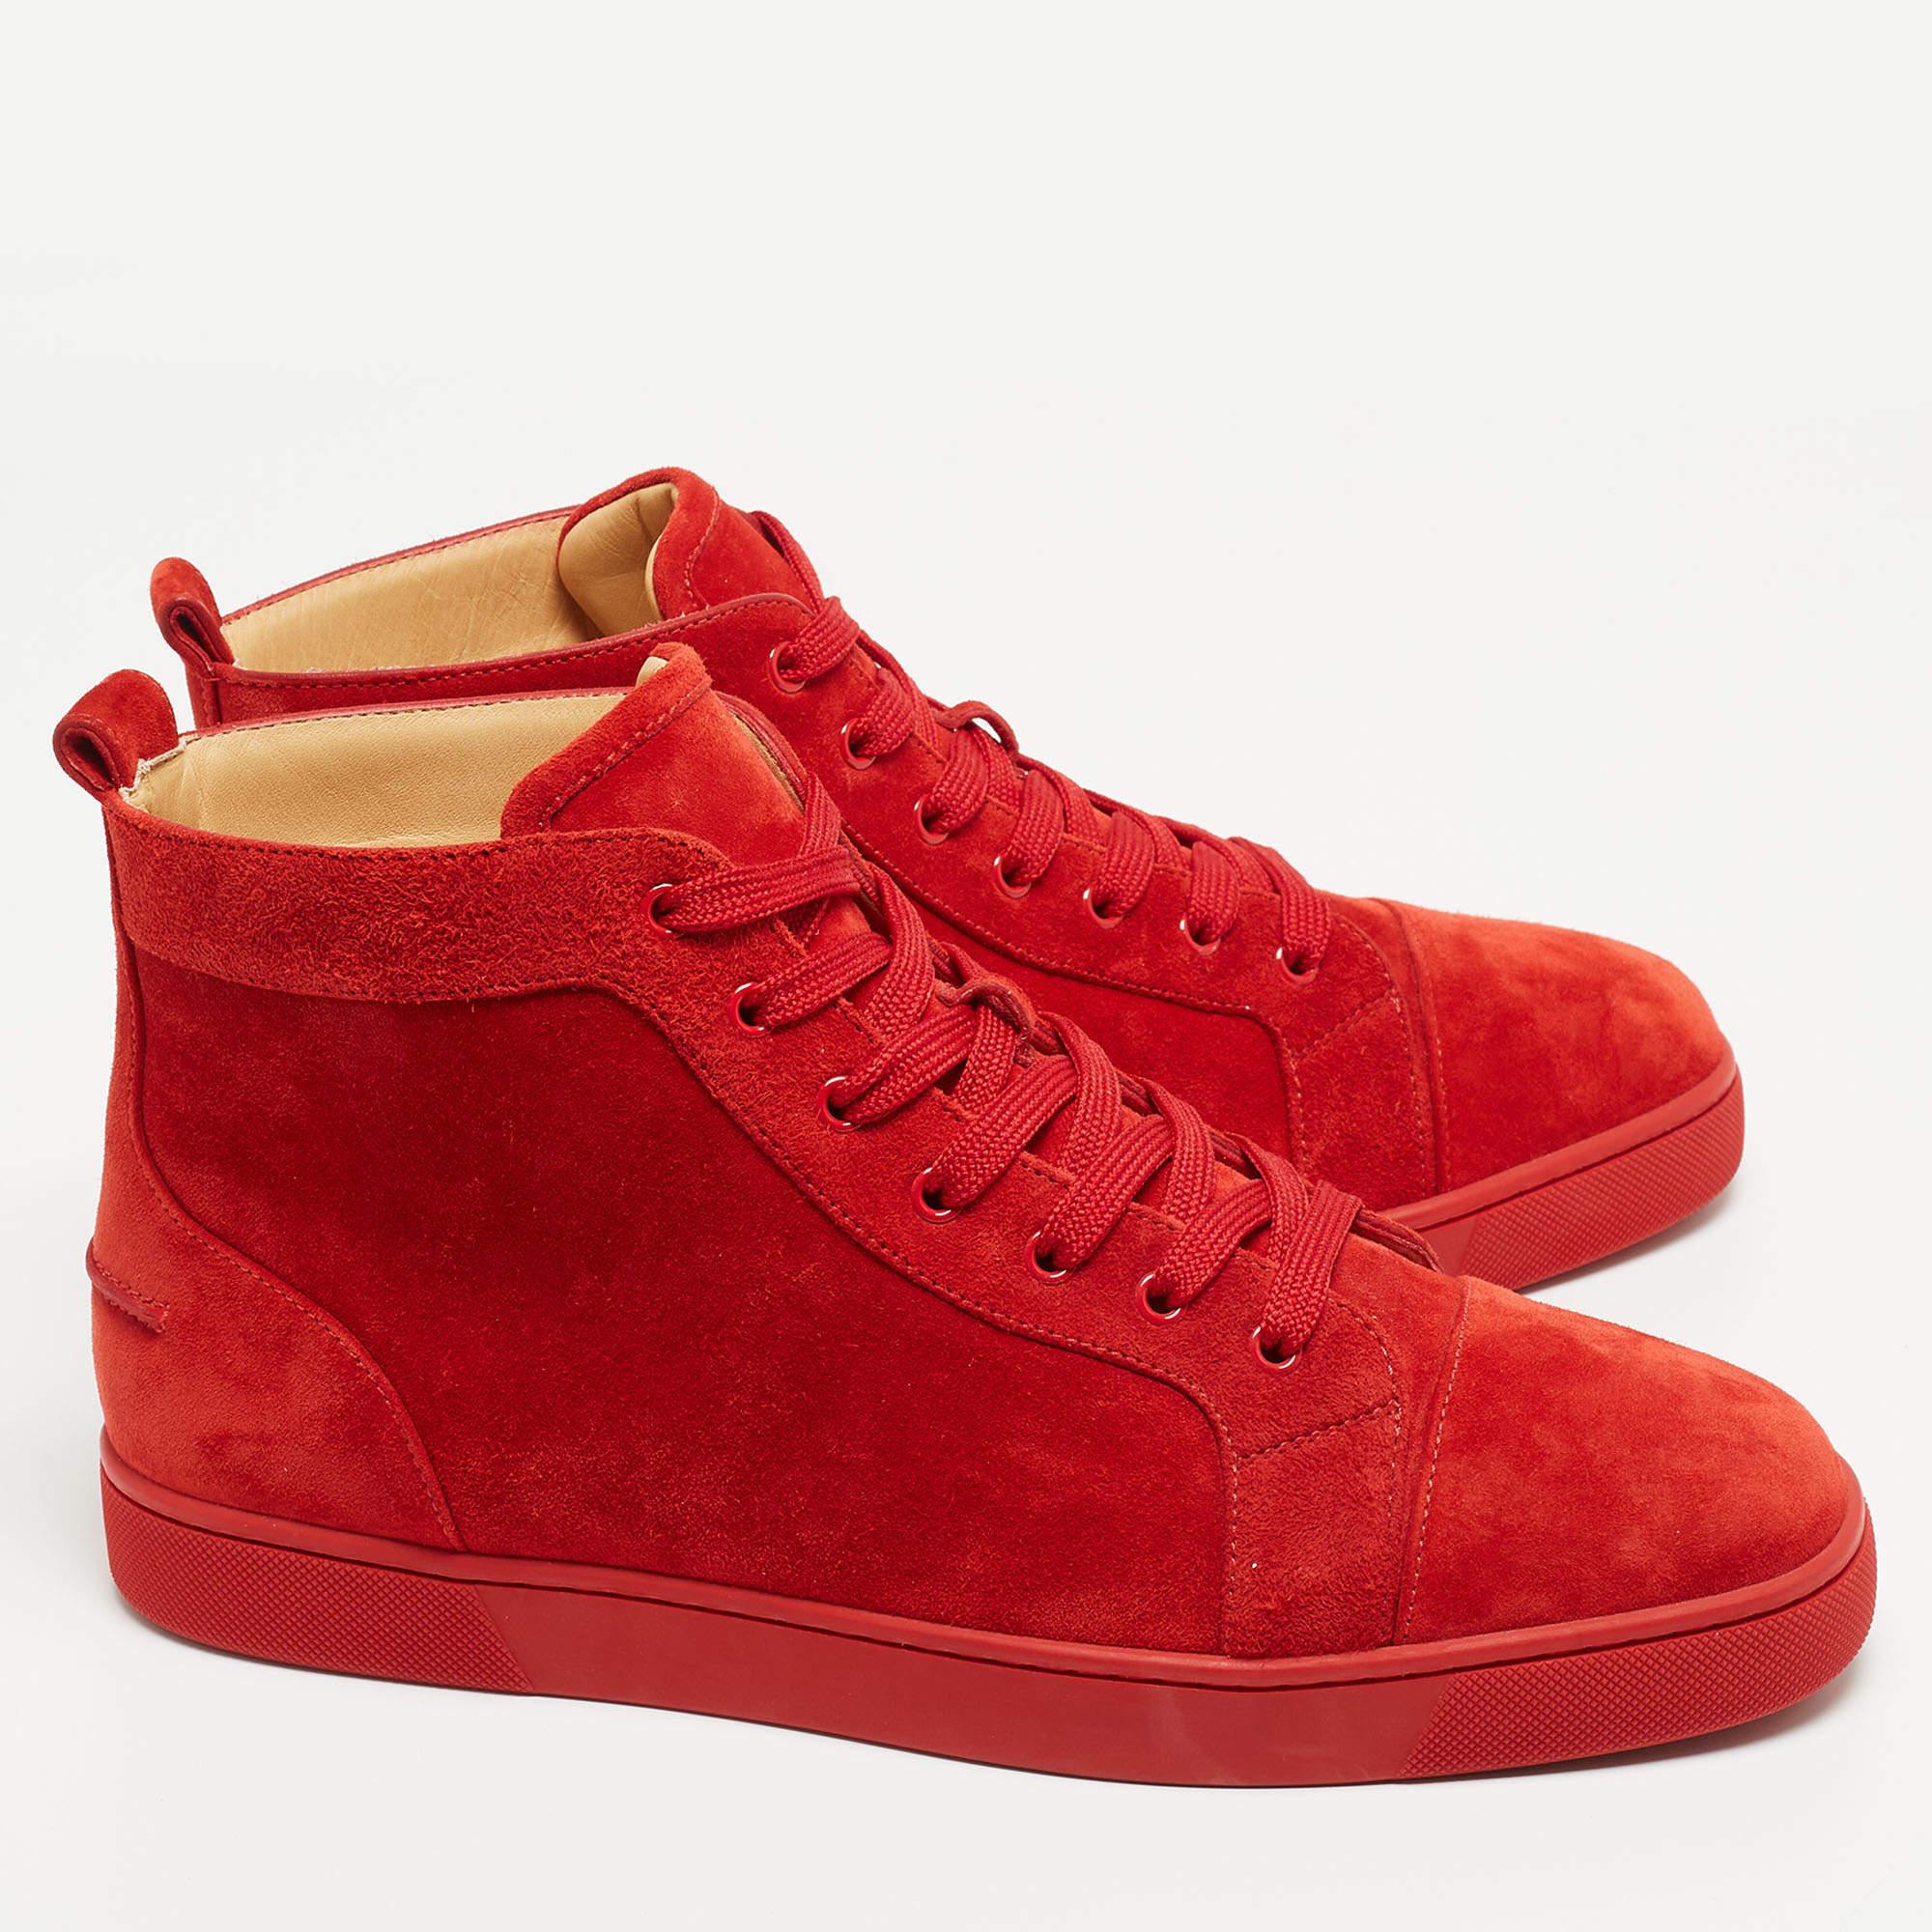 Give your outfit a luxe update with this pair of Christian Louboutin red sneakers. The shoes are sewn perfectly to help you make a statement in them for a long time.

